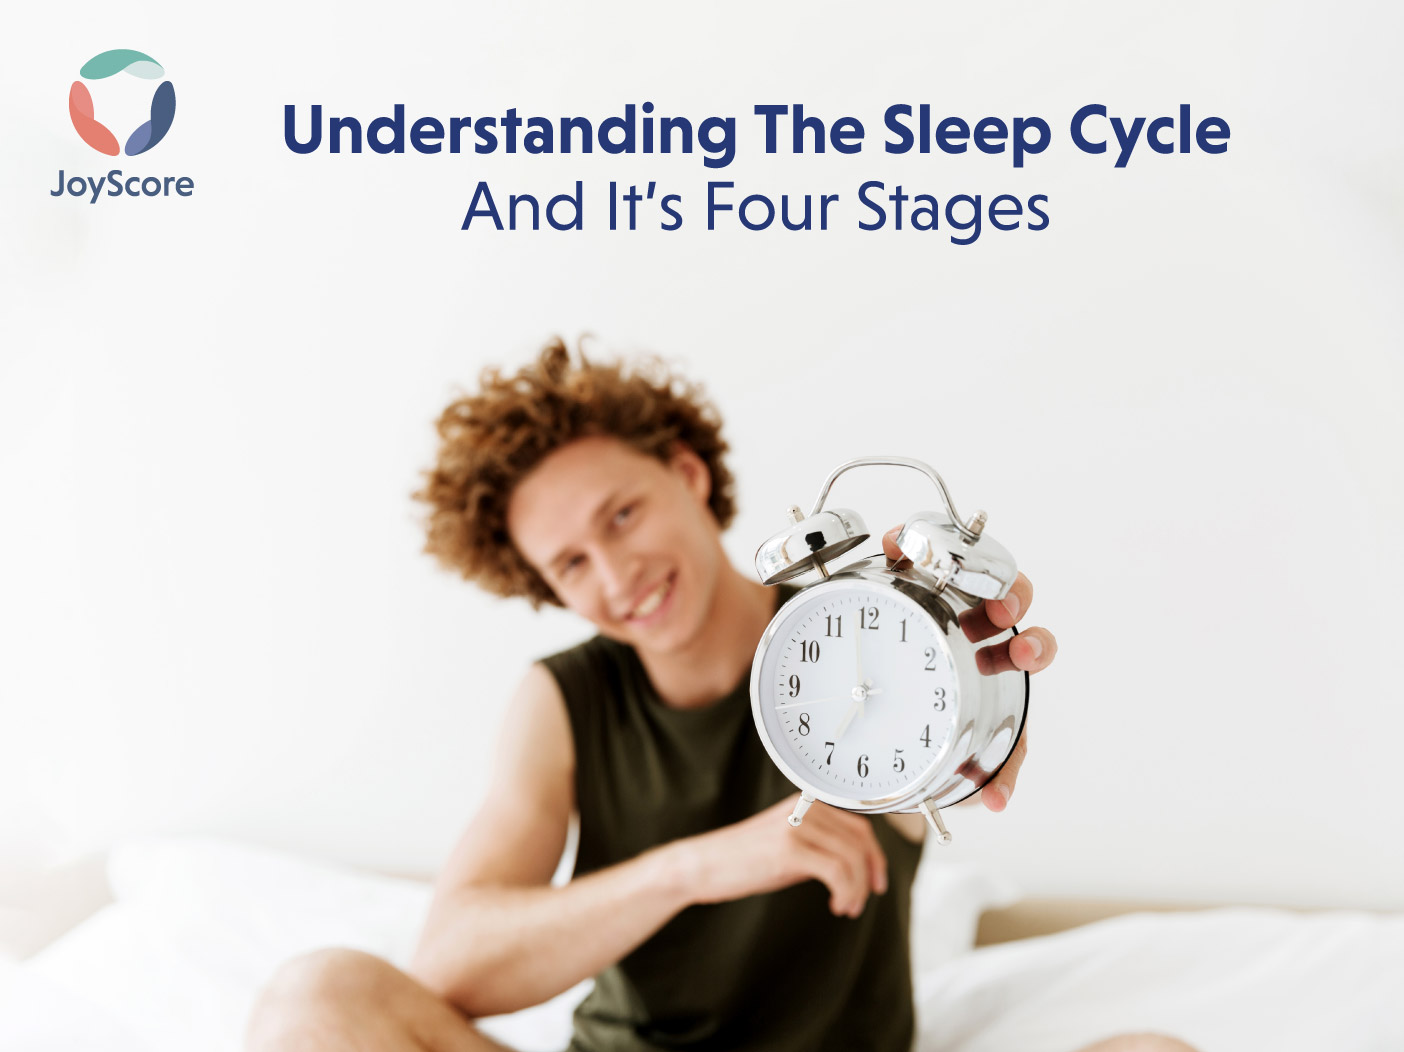 Understanding Your Sleep Cycle: The Four Stages Of Sleep